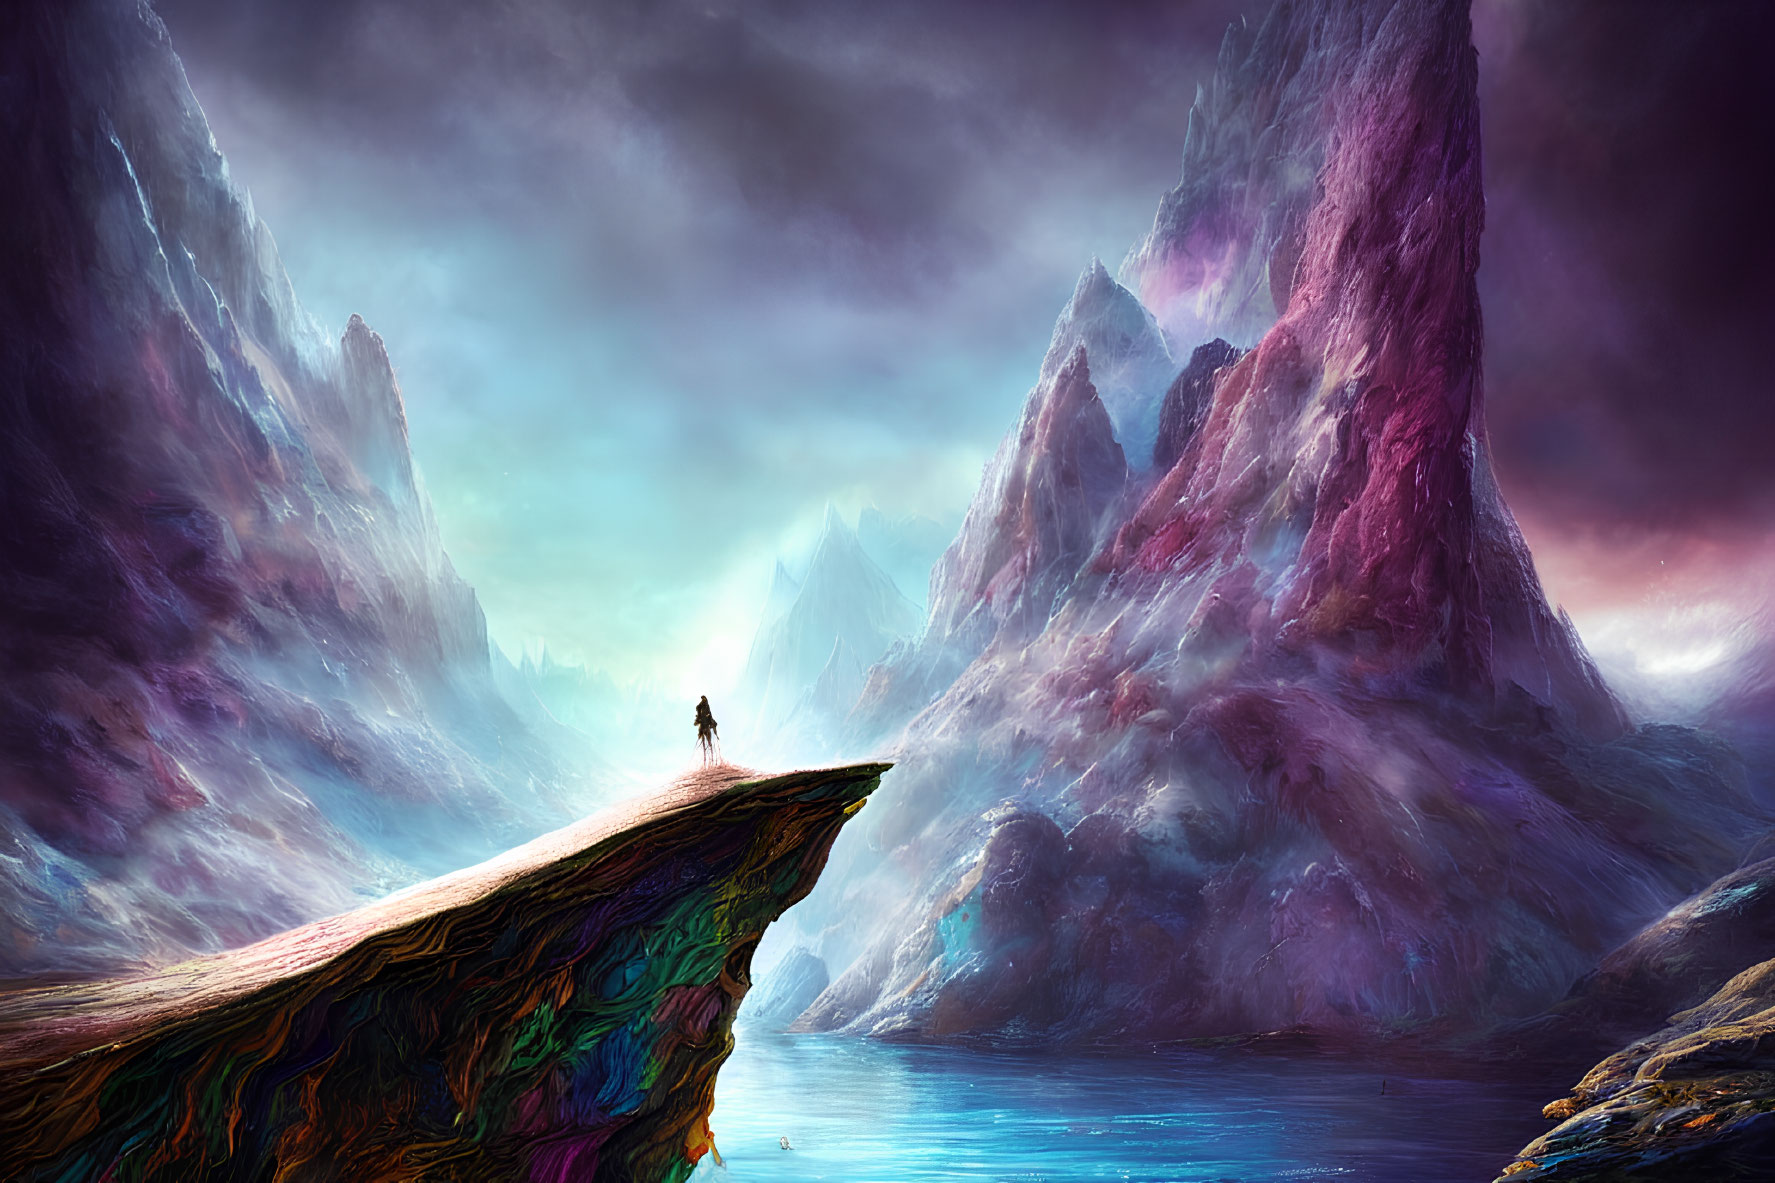 Lone Figure on Cliff Overlooking Surreal Purple Mountains